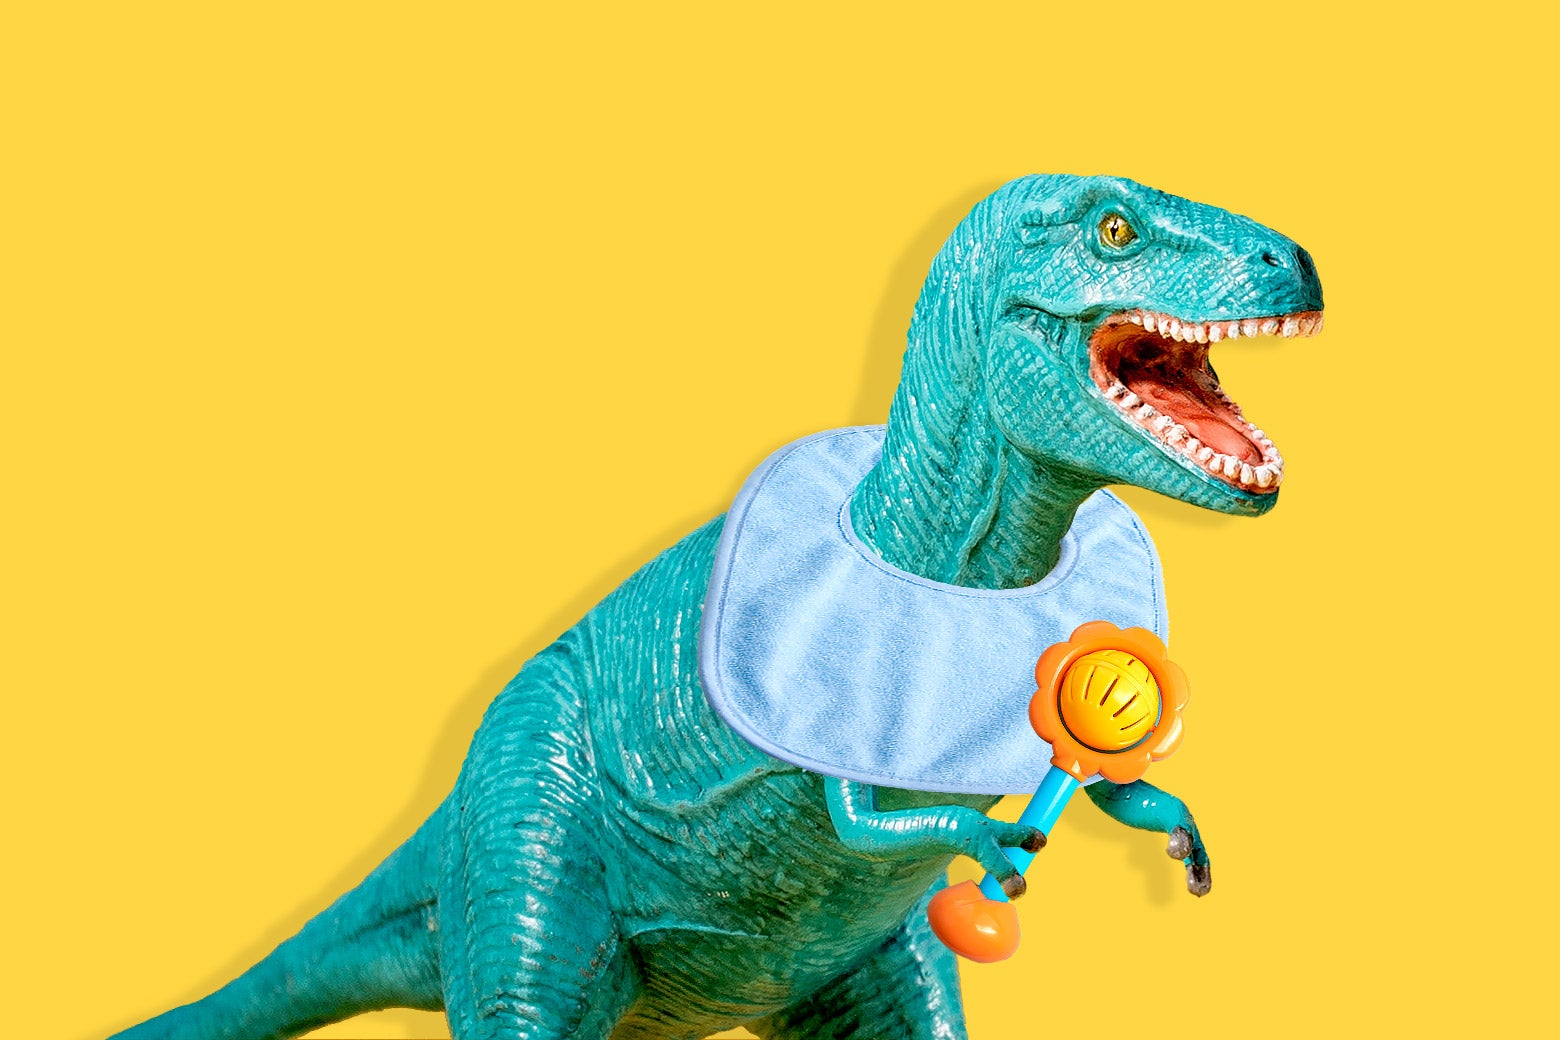 A Tyrannosaurus rex wearing a bib and holding a rattle.